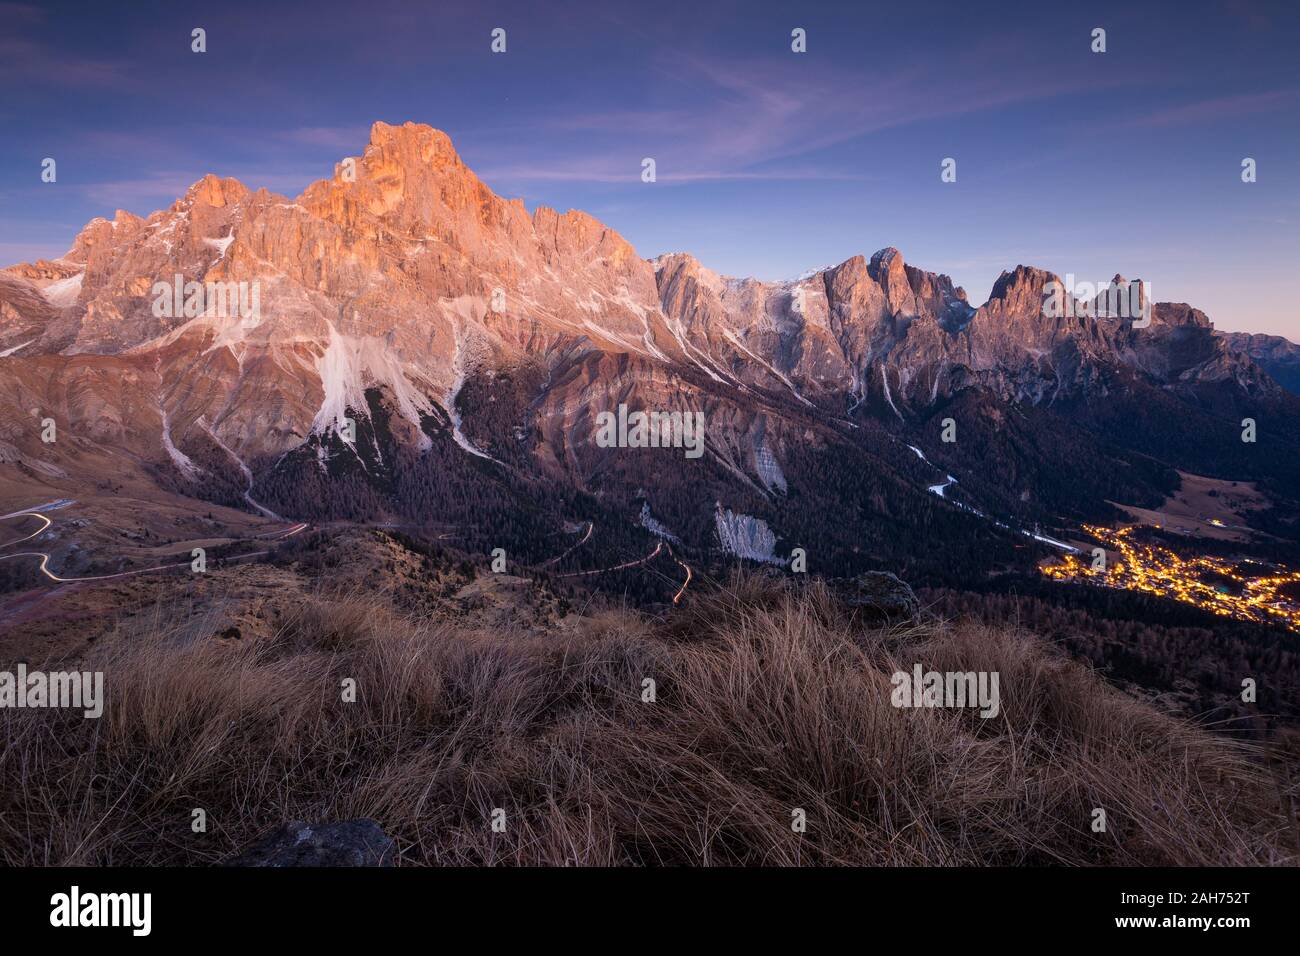 The Pale di San Martino massif at dusk, sunset. Rolle pass and San Martino di Castrozza lights. The Dolomites of Trentino. Italian Alps. Europe. Stock Photo